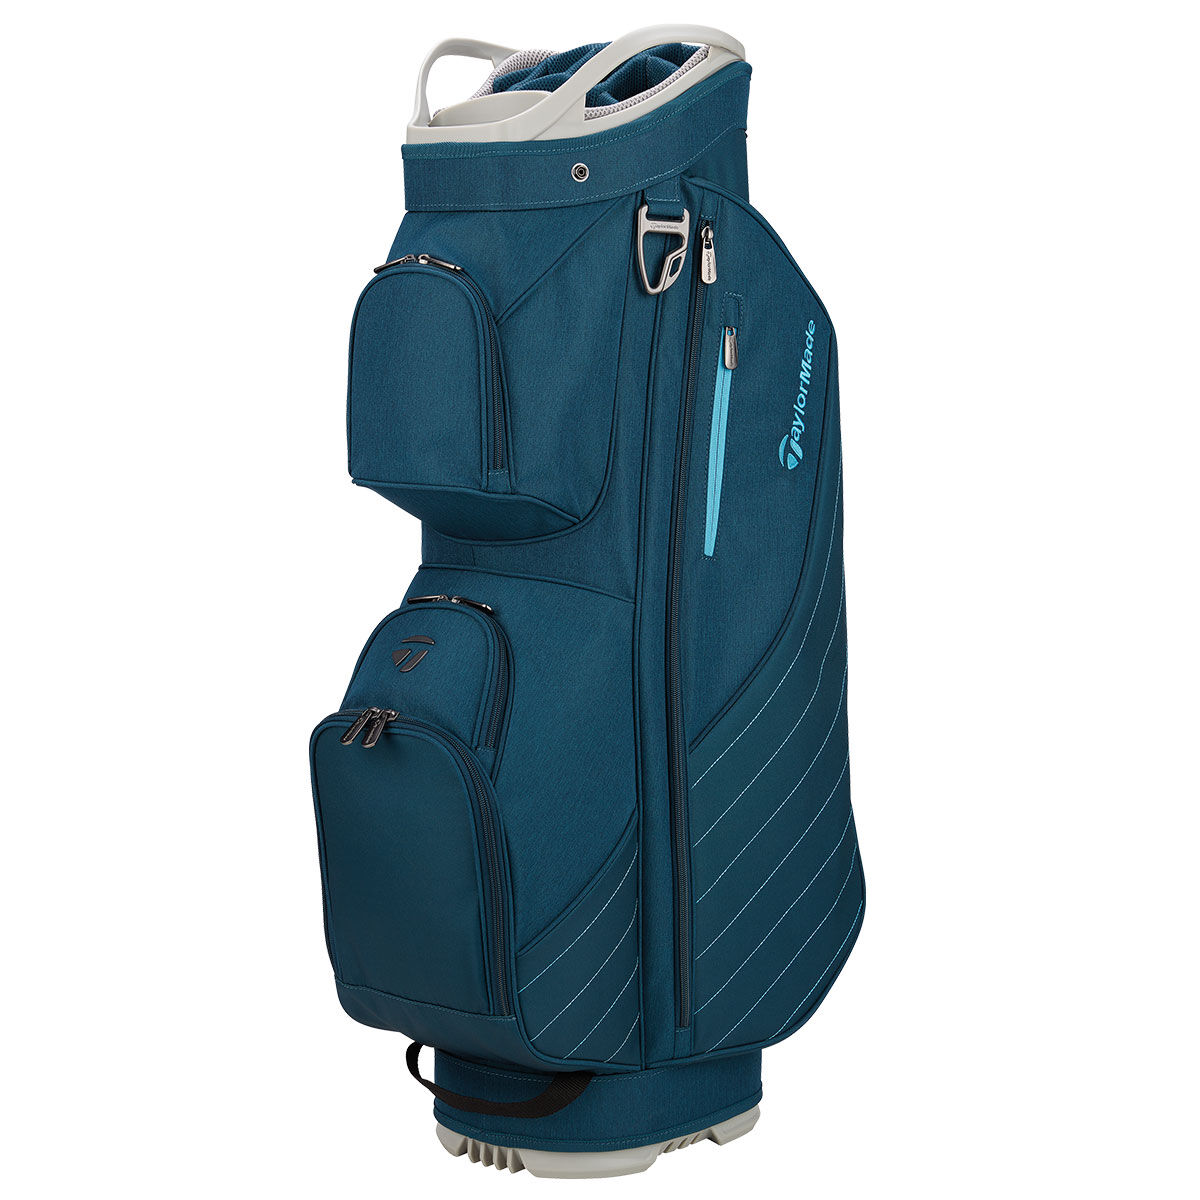 TaylorMade Grey and Navy Blue Lightweight Lanai Golf Cart Bag | American Golf, One Size von TaylorMade